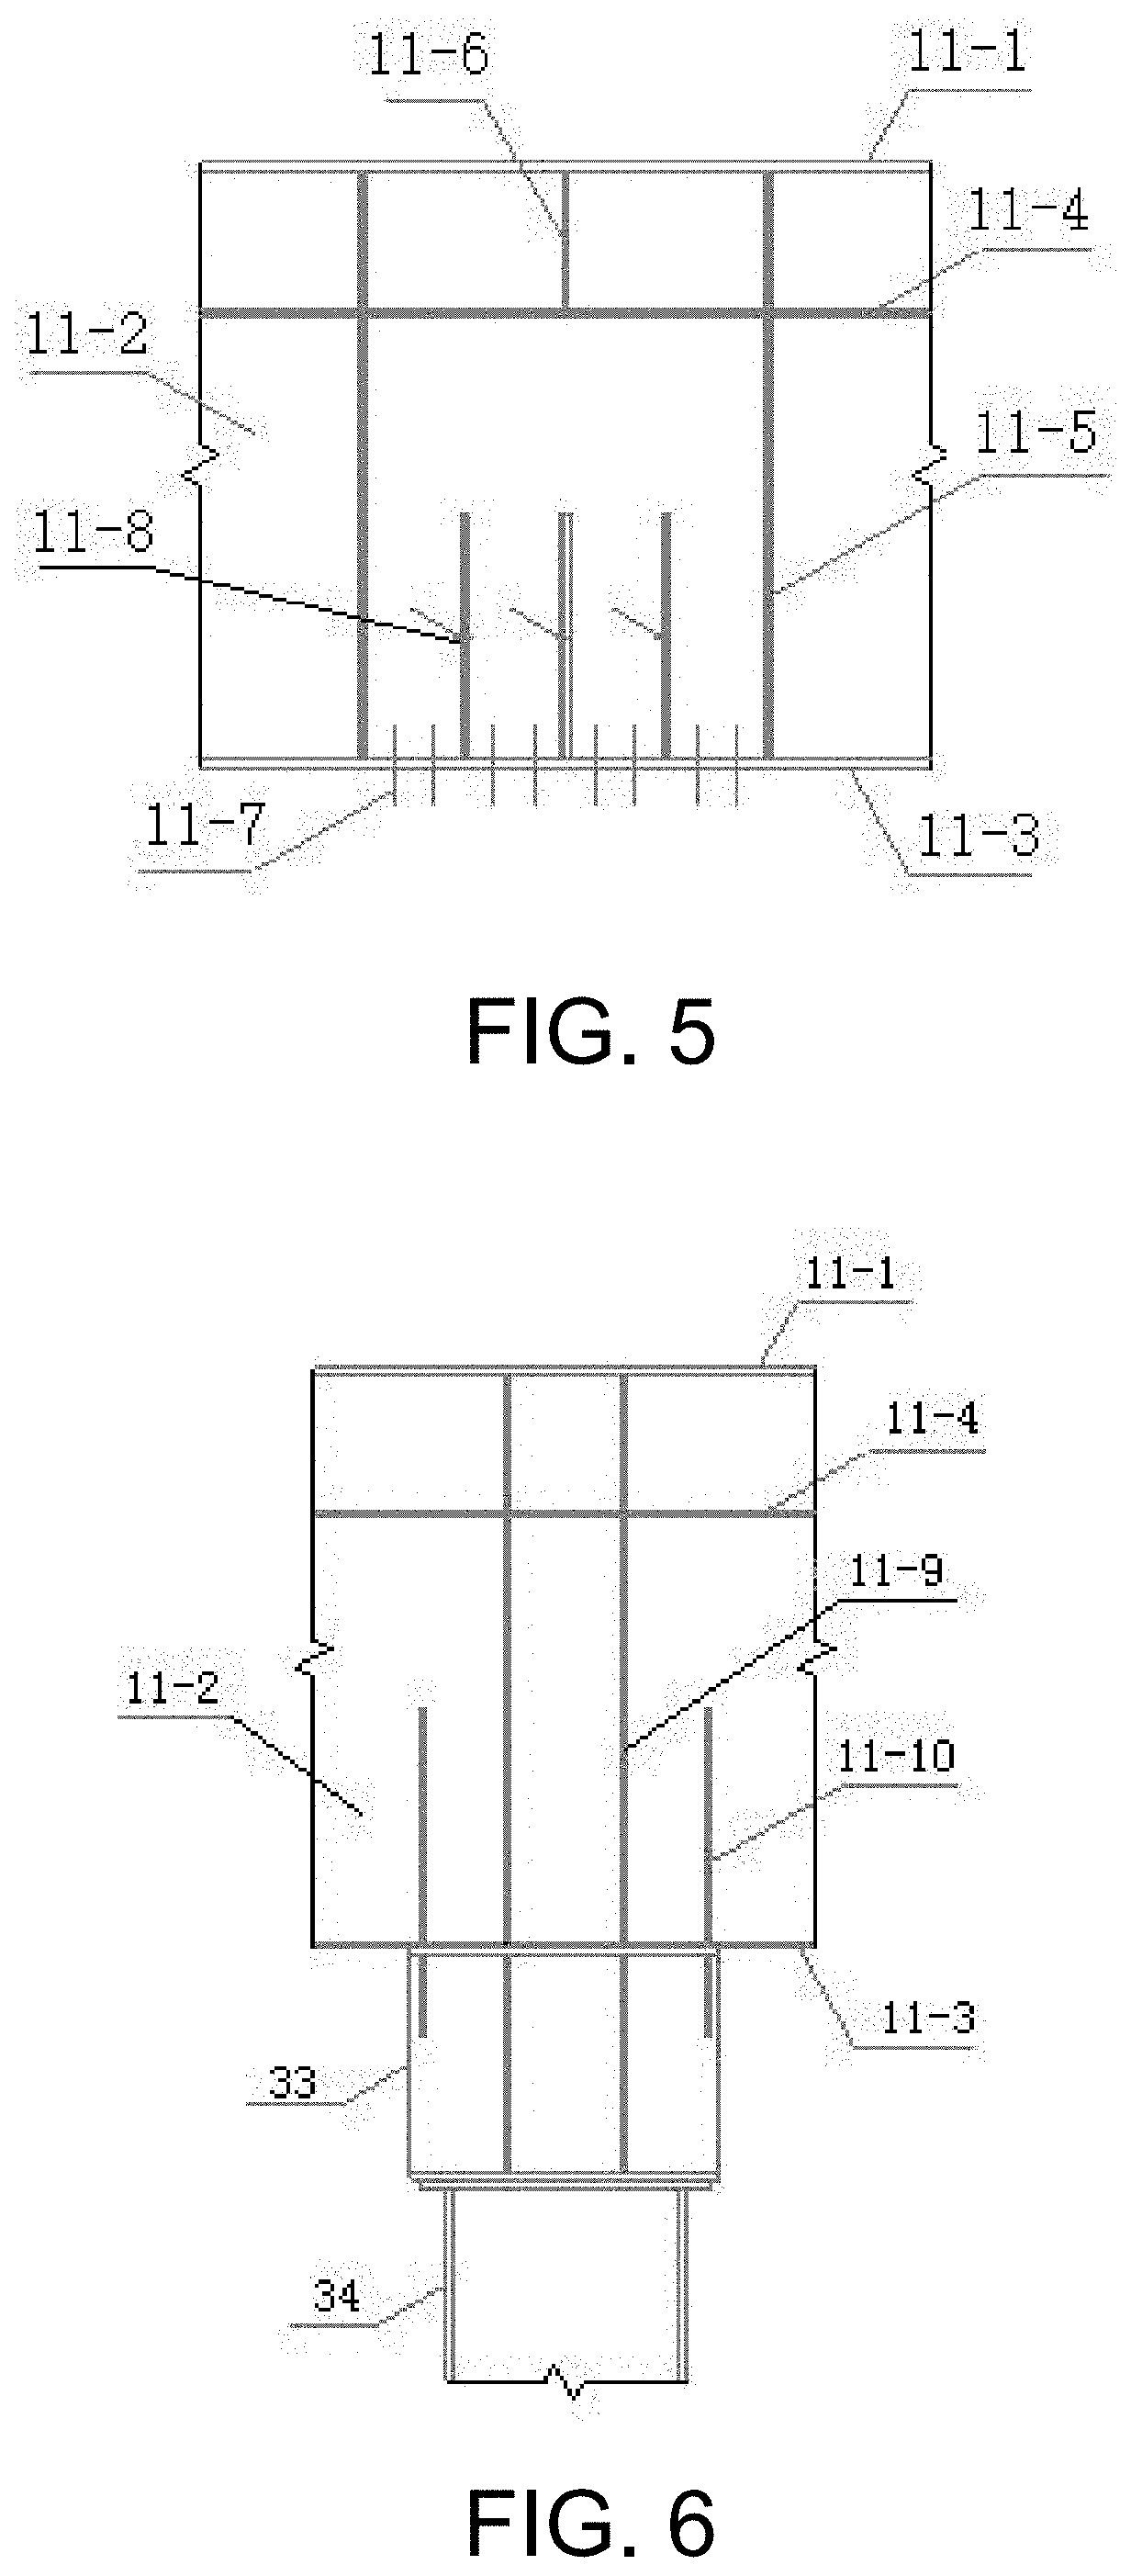 Temporary support system for road bridge pre-fabricated small box girder-type concealed bent cap, and method of constructing same